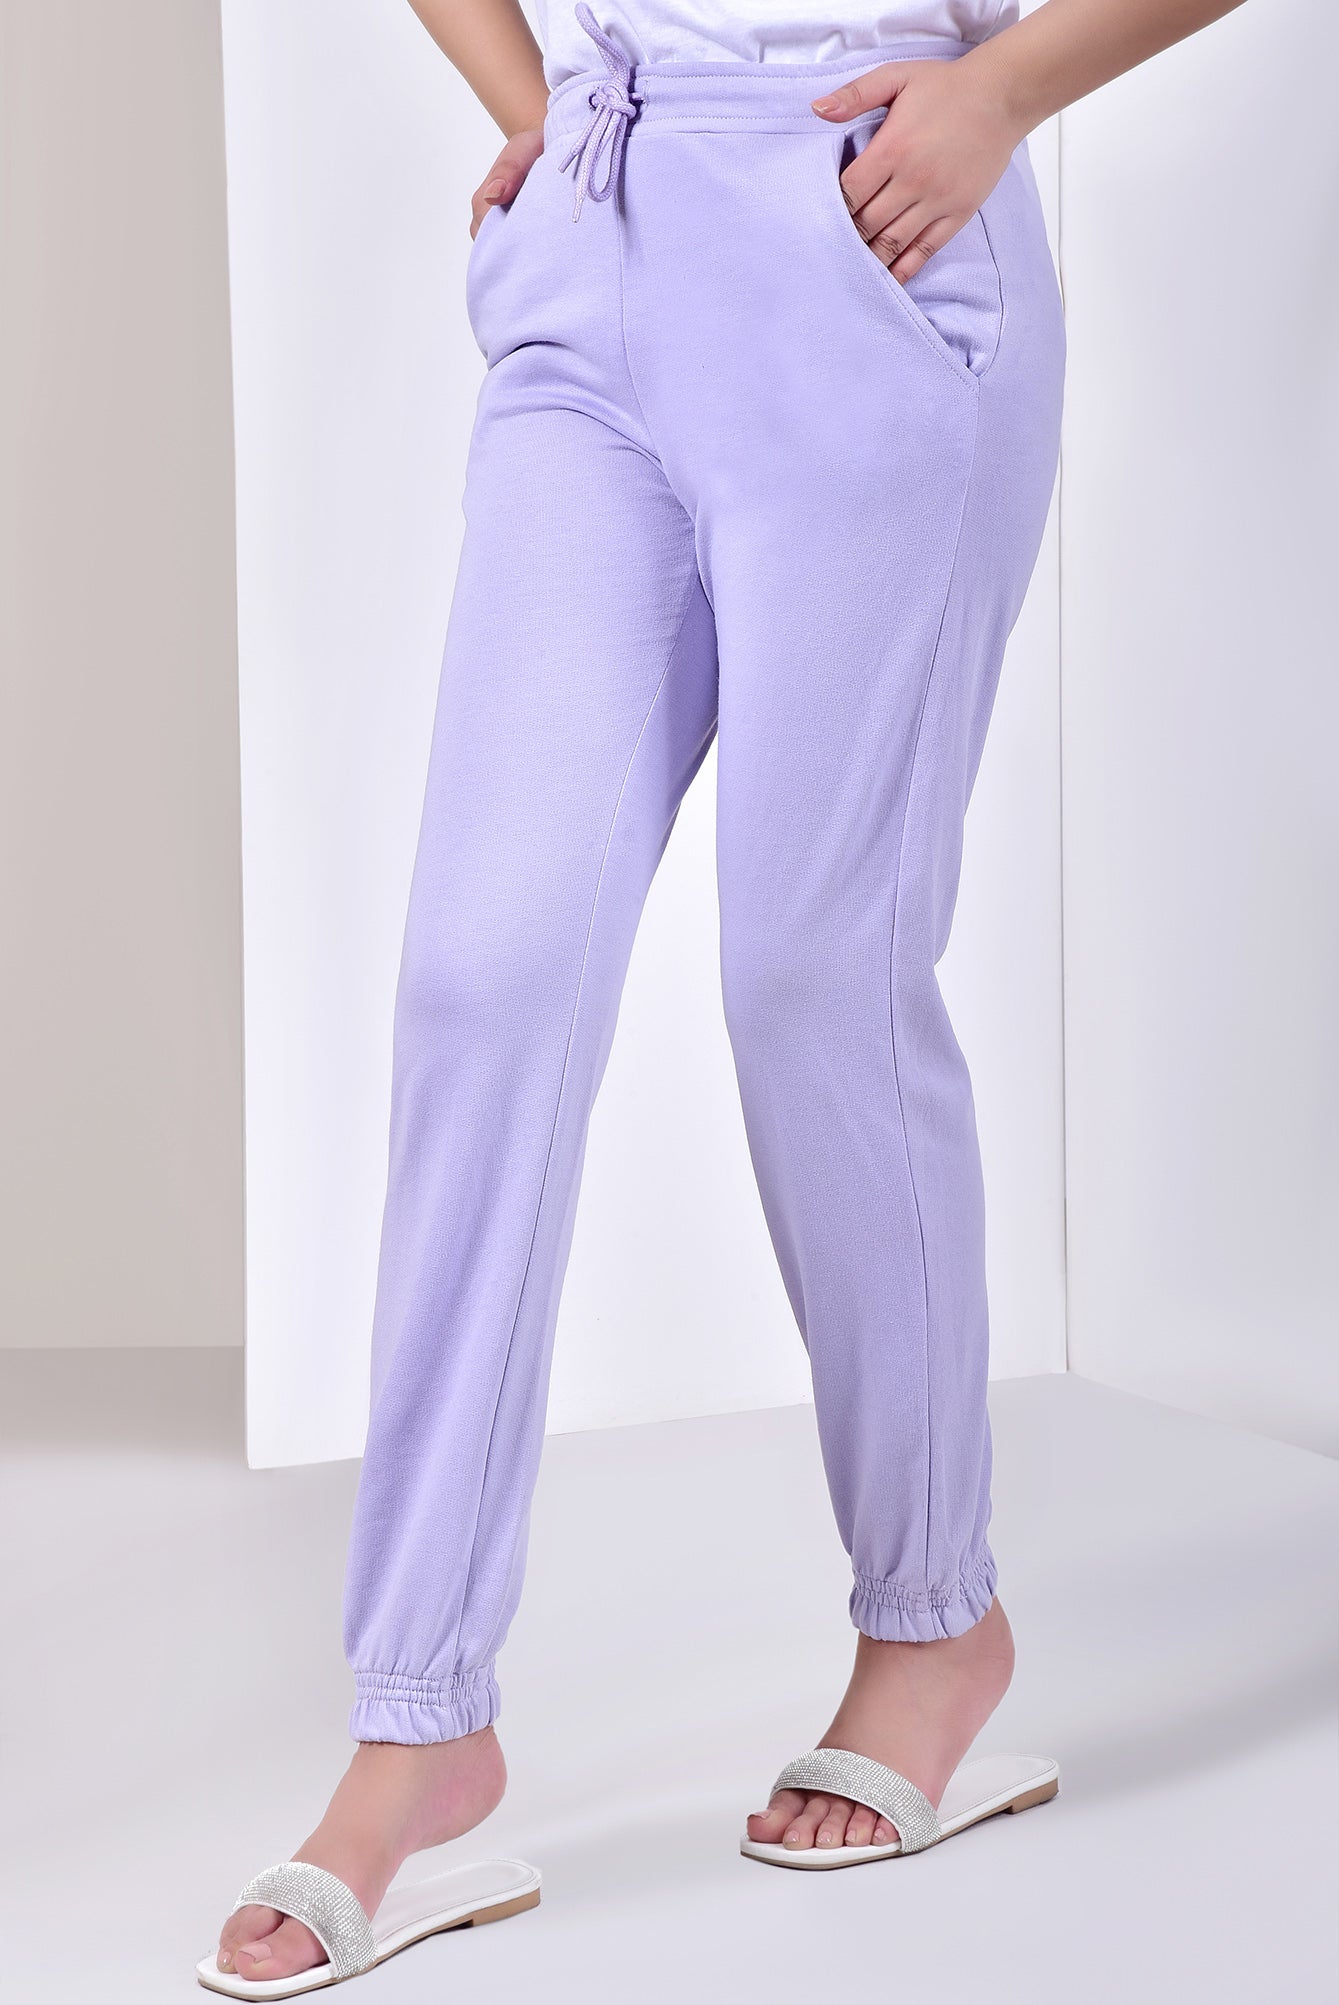 PULL ON TROUSER LILAC LT-A-1551